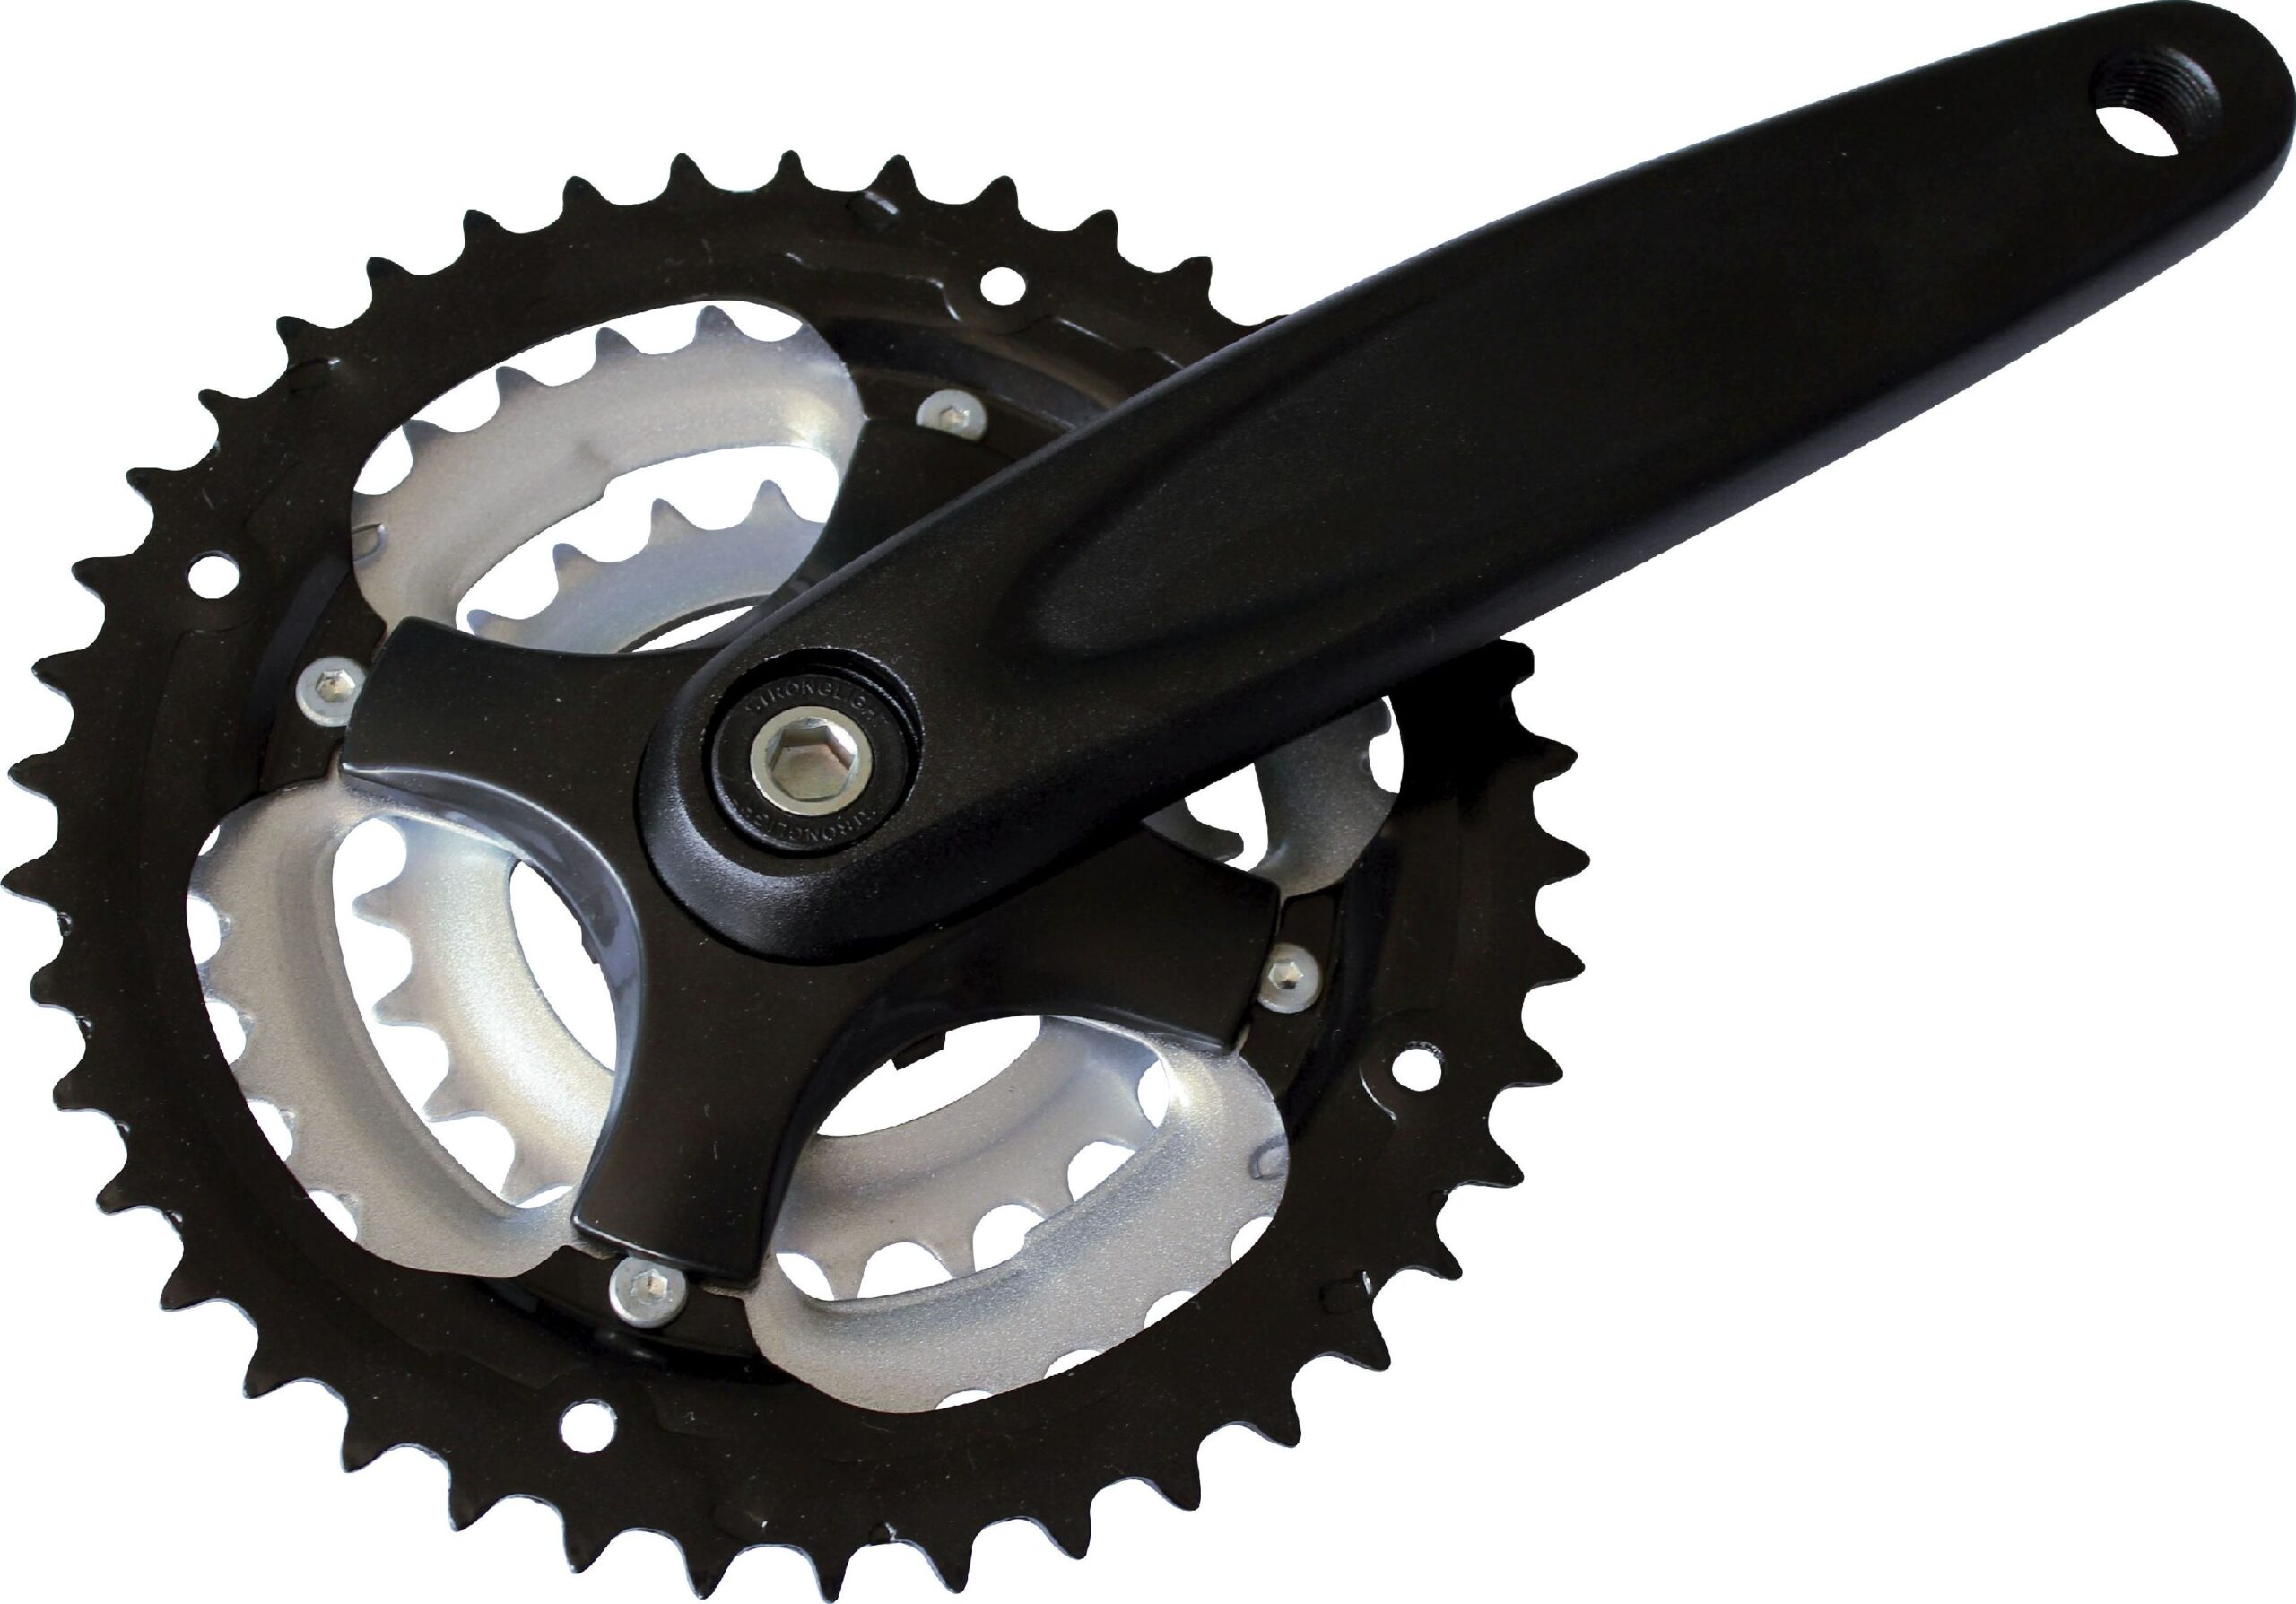 ARG7042Z Stronglight Argos 3X9 24/34/42T Chainset: 170mm